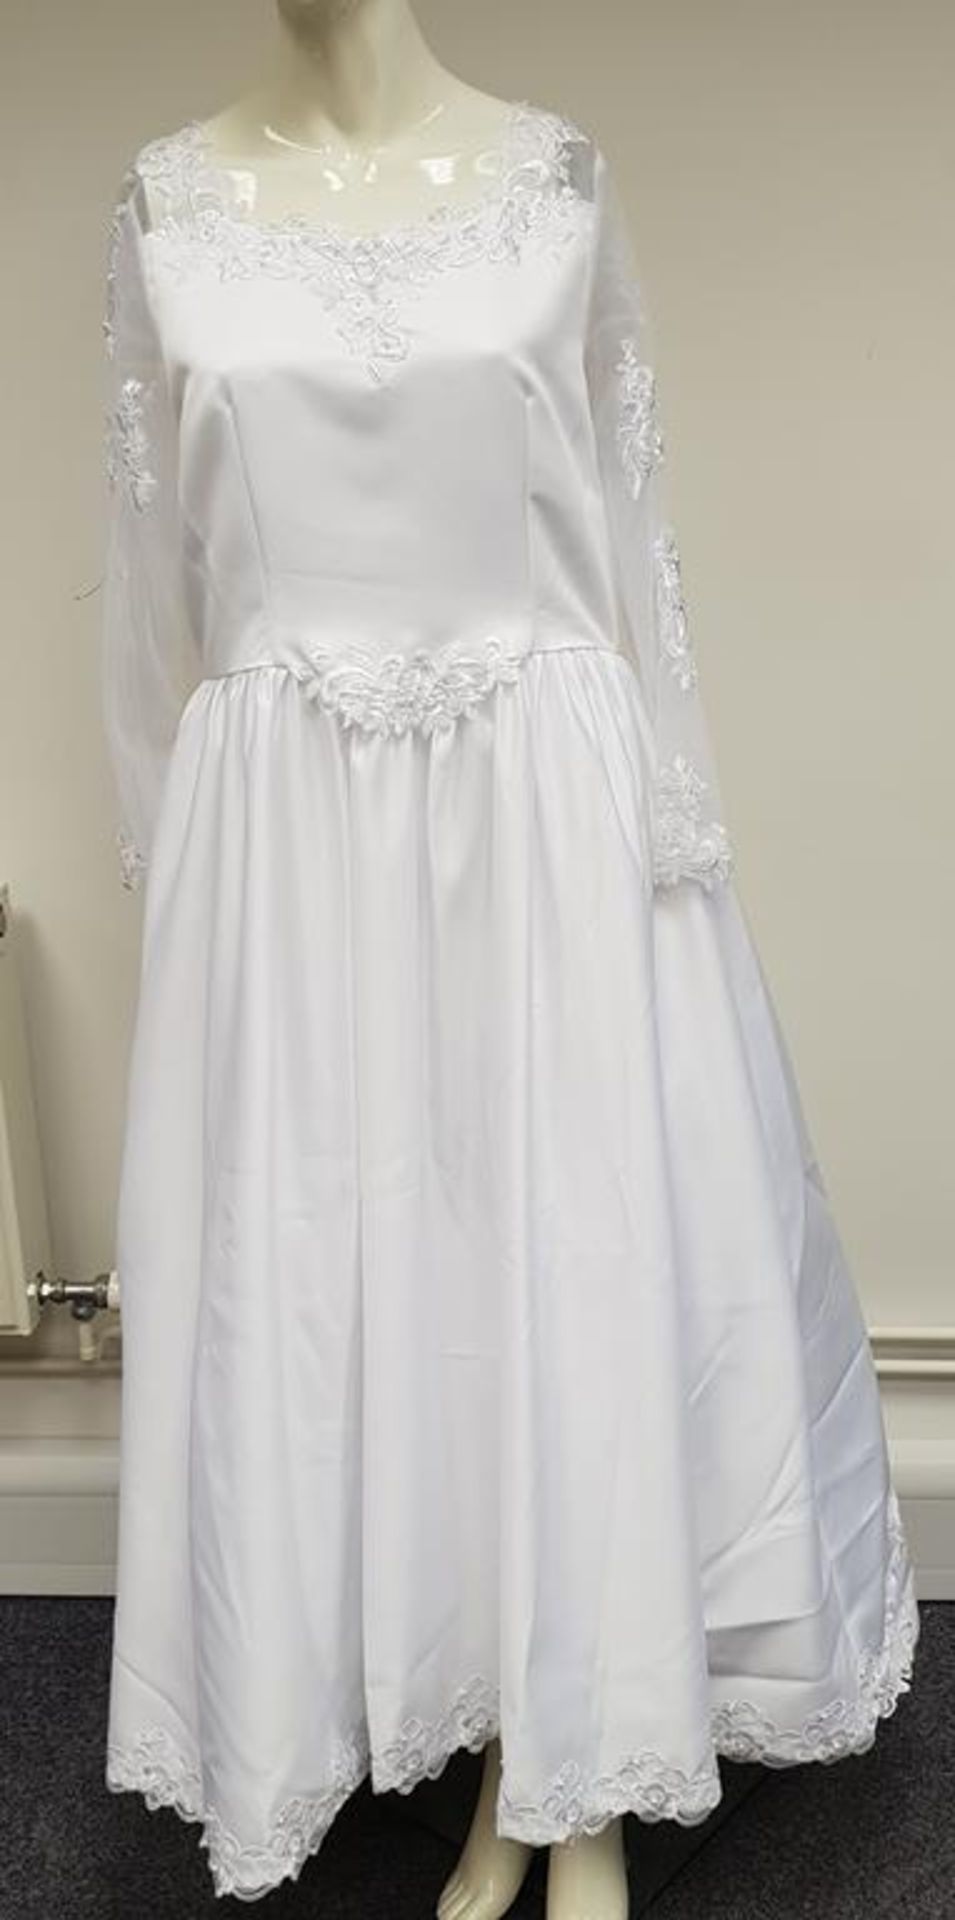 * 17 Childrens Clothing to include Christening/Holy Communion Wear, Makes Sweetie Pie, Jyson, - Image 5 of 16